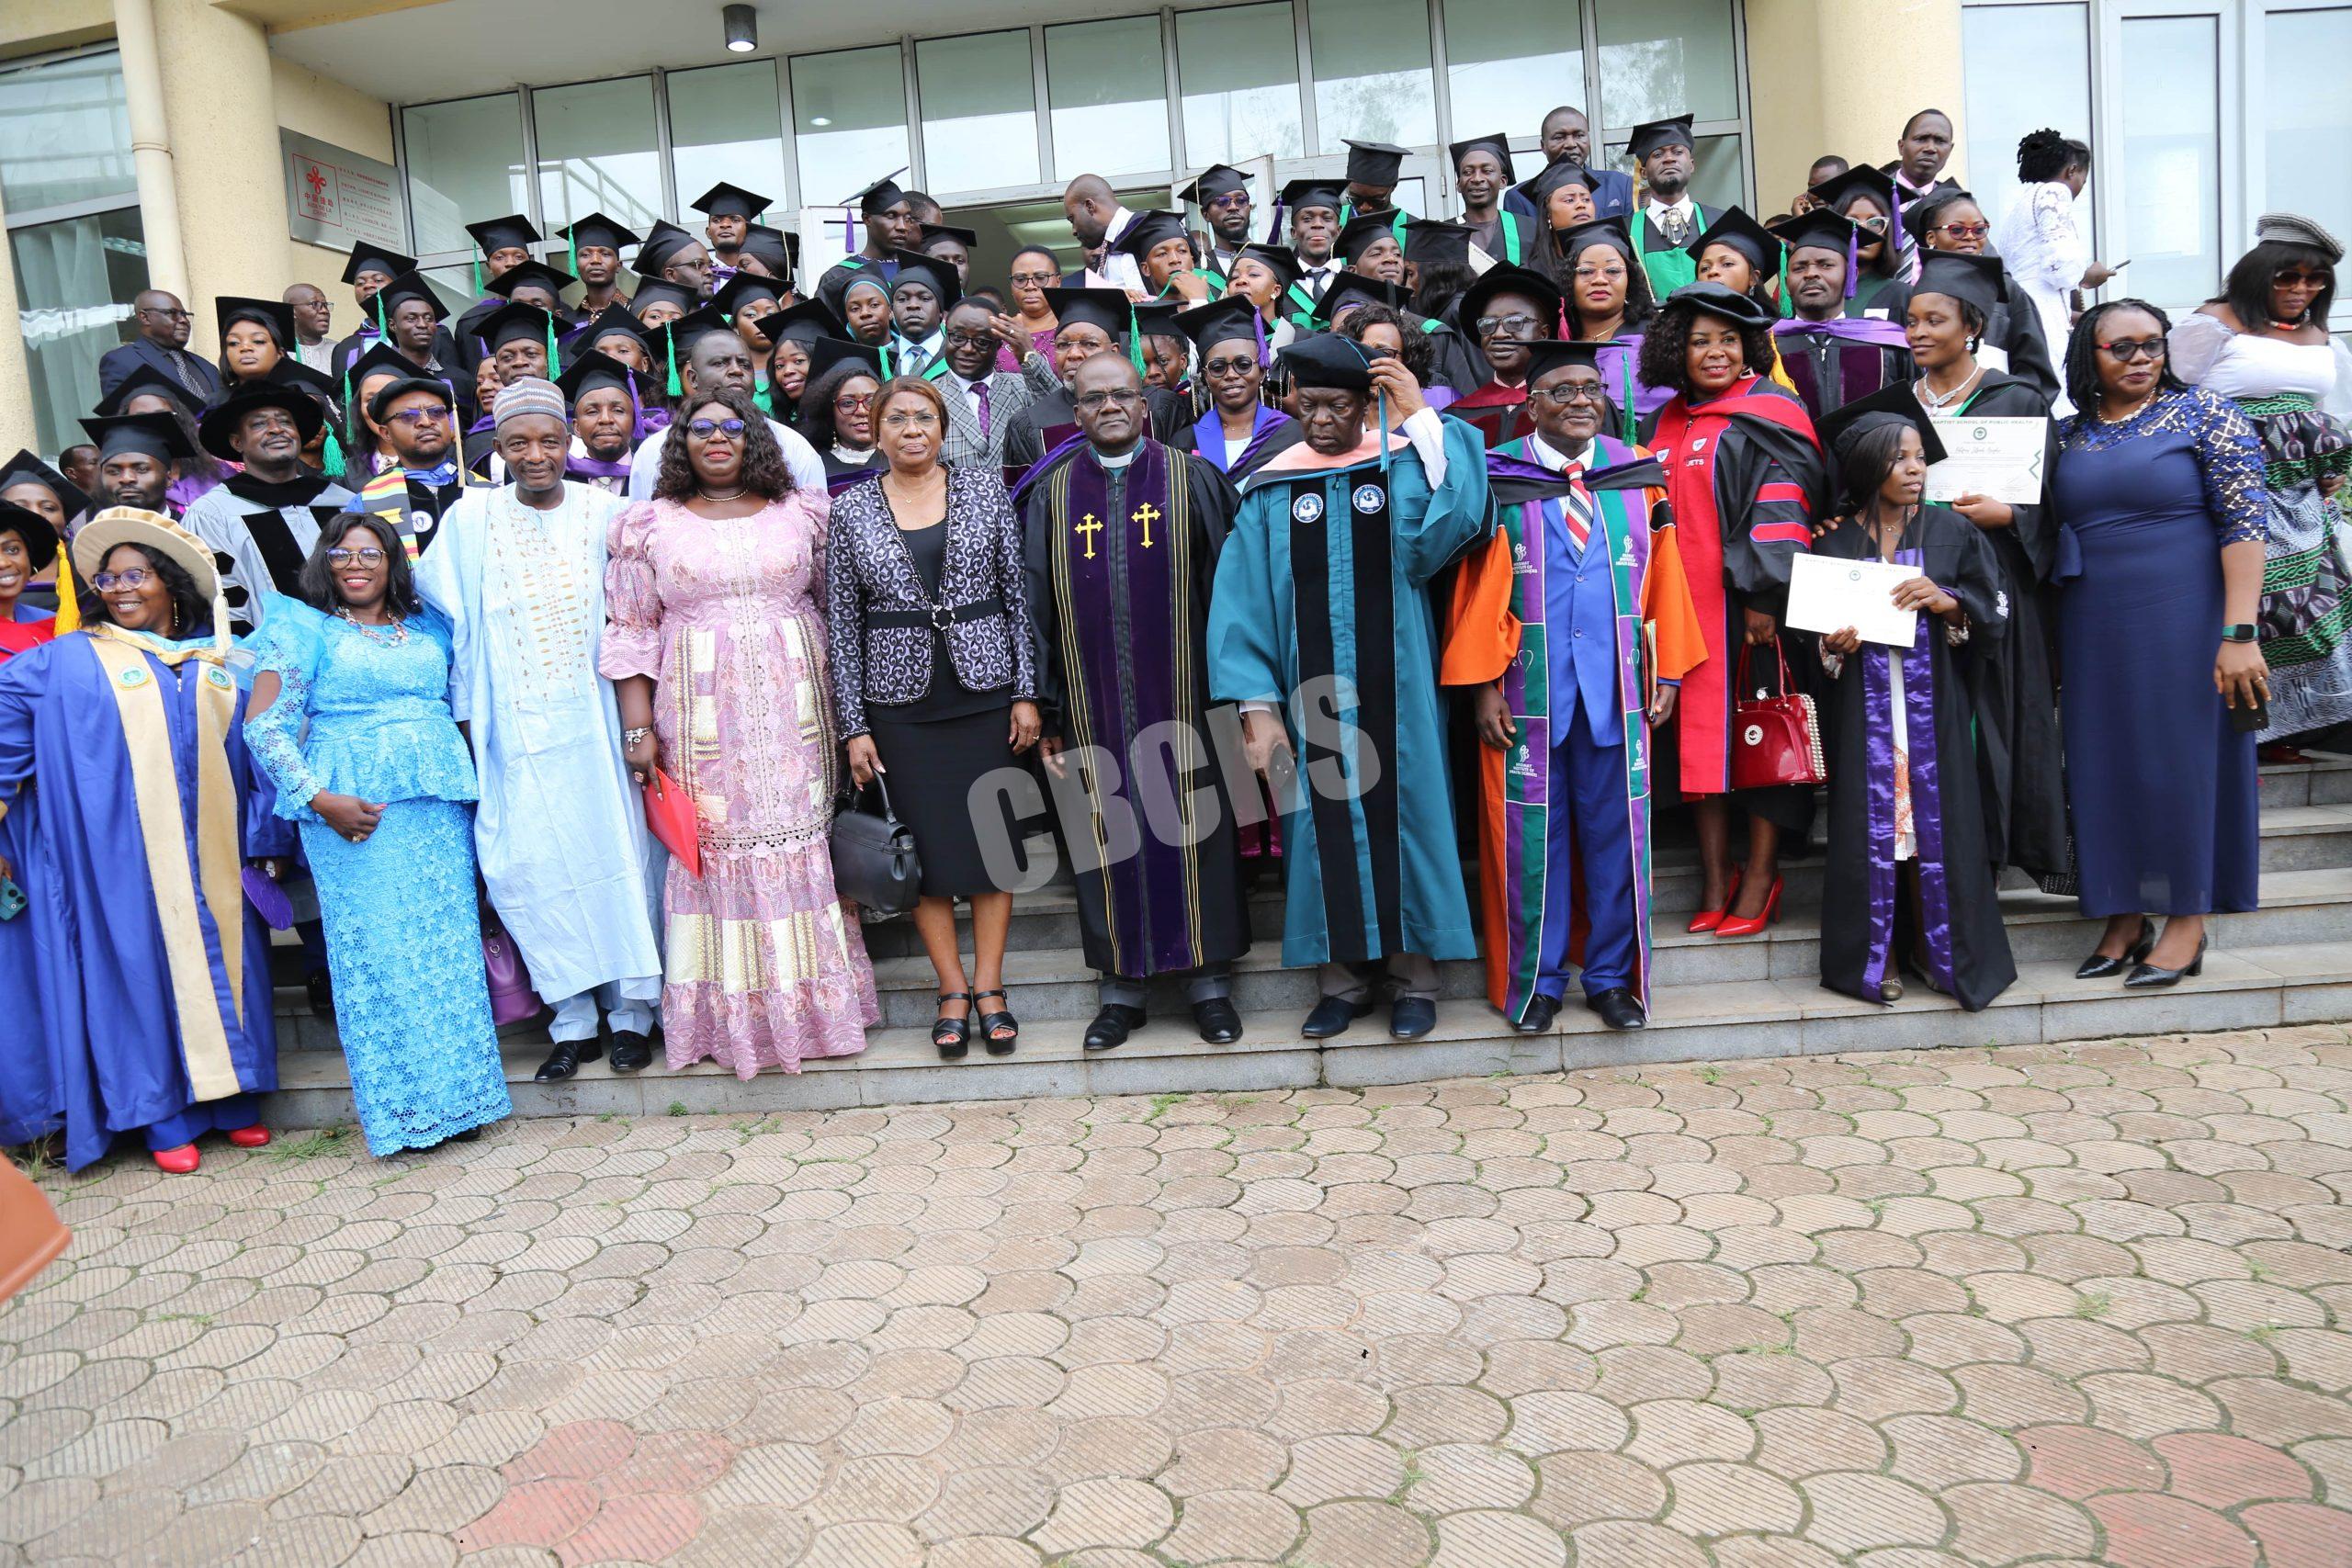 A New Dawn for Rehabilitation Services in Cameroon: Baptist School of Public Health Celebrates the Graduation of Multi-skilled Rehabilitation Technicians and Community-Based Rehabilitation Workers